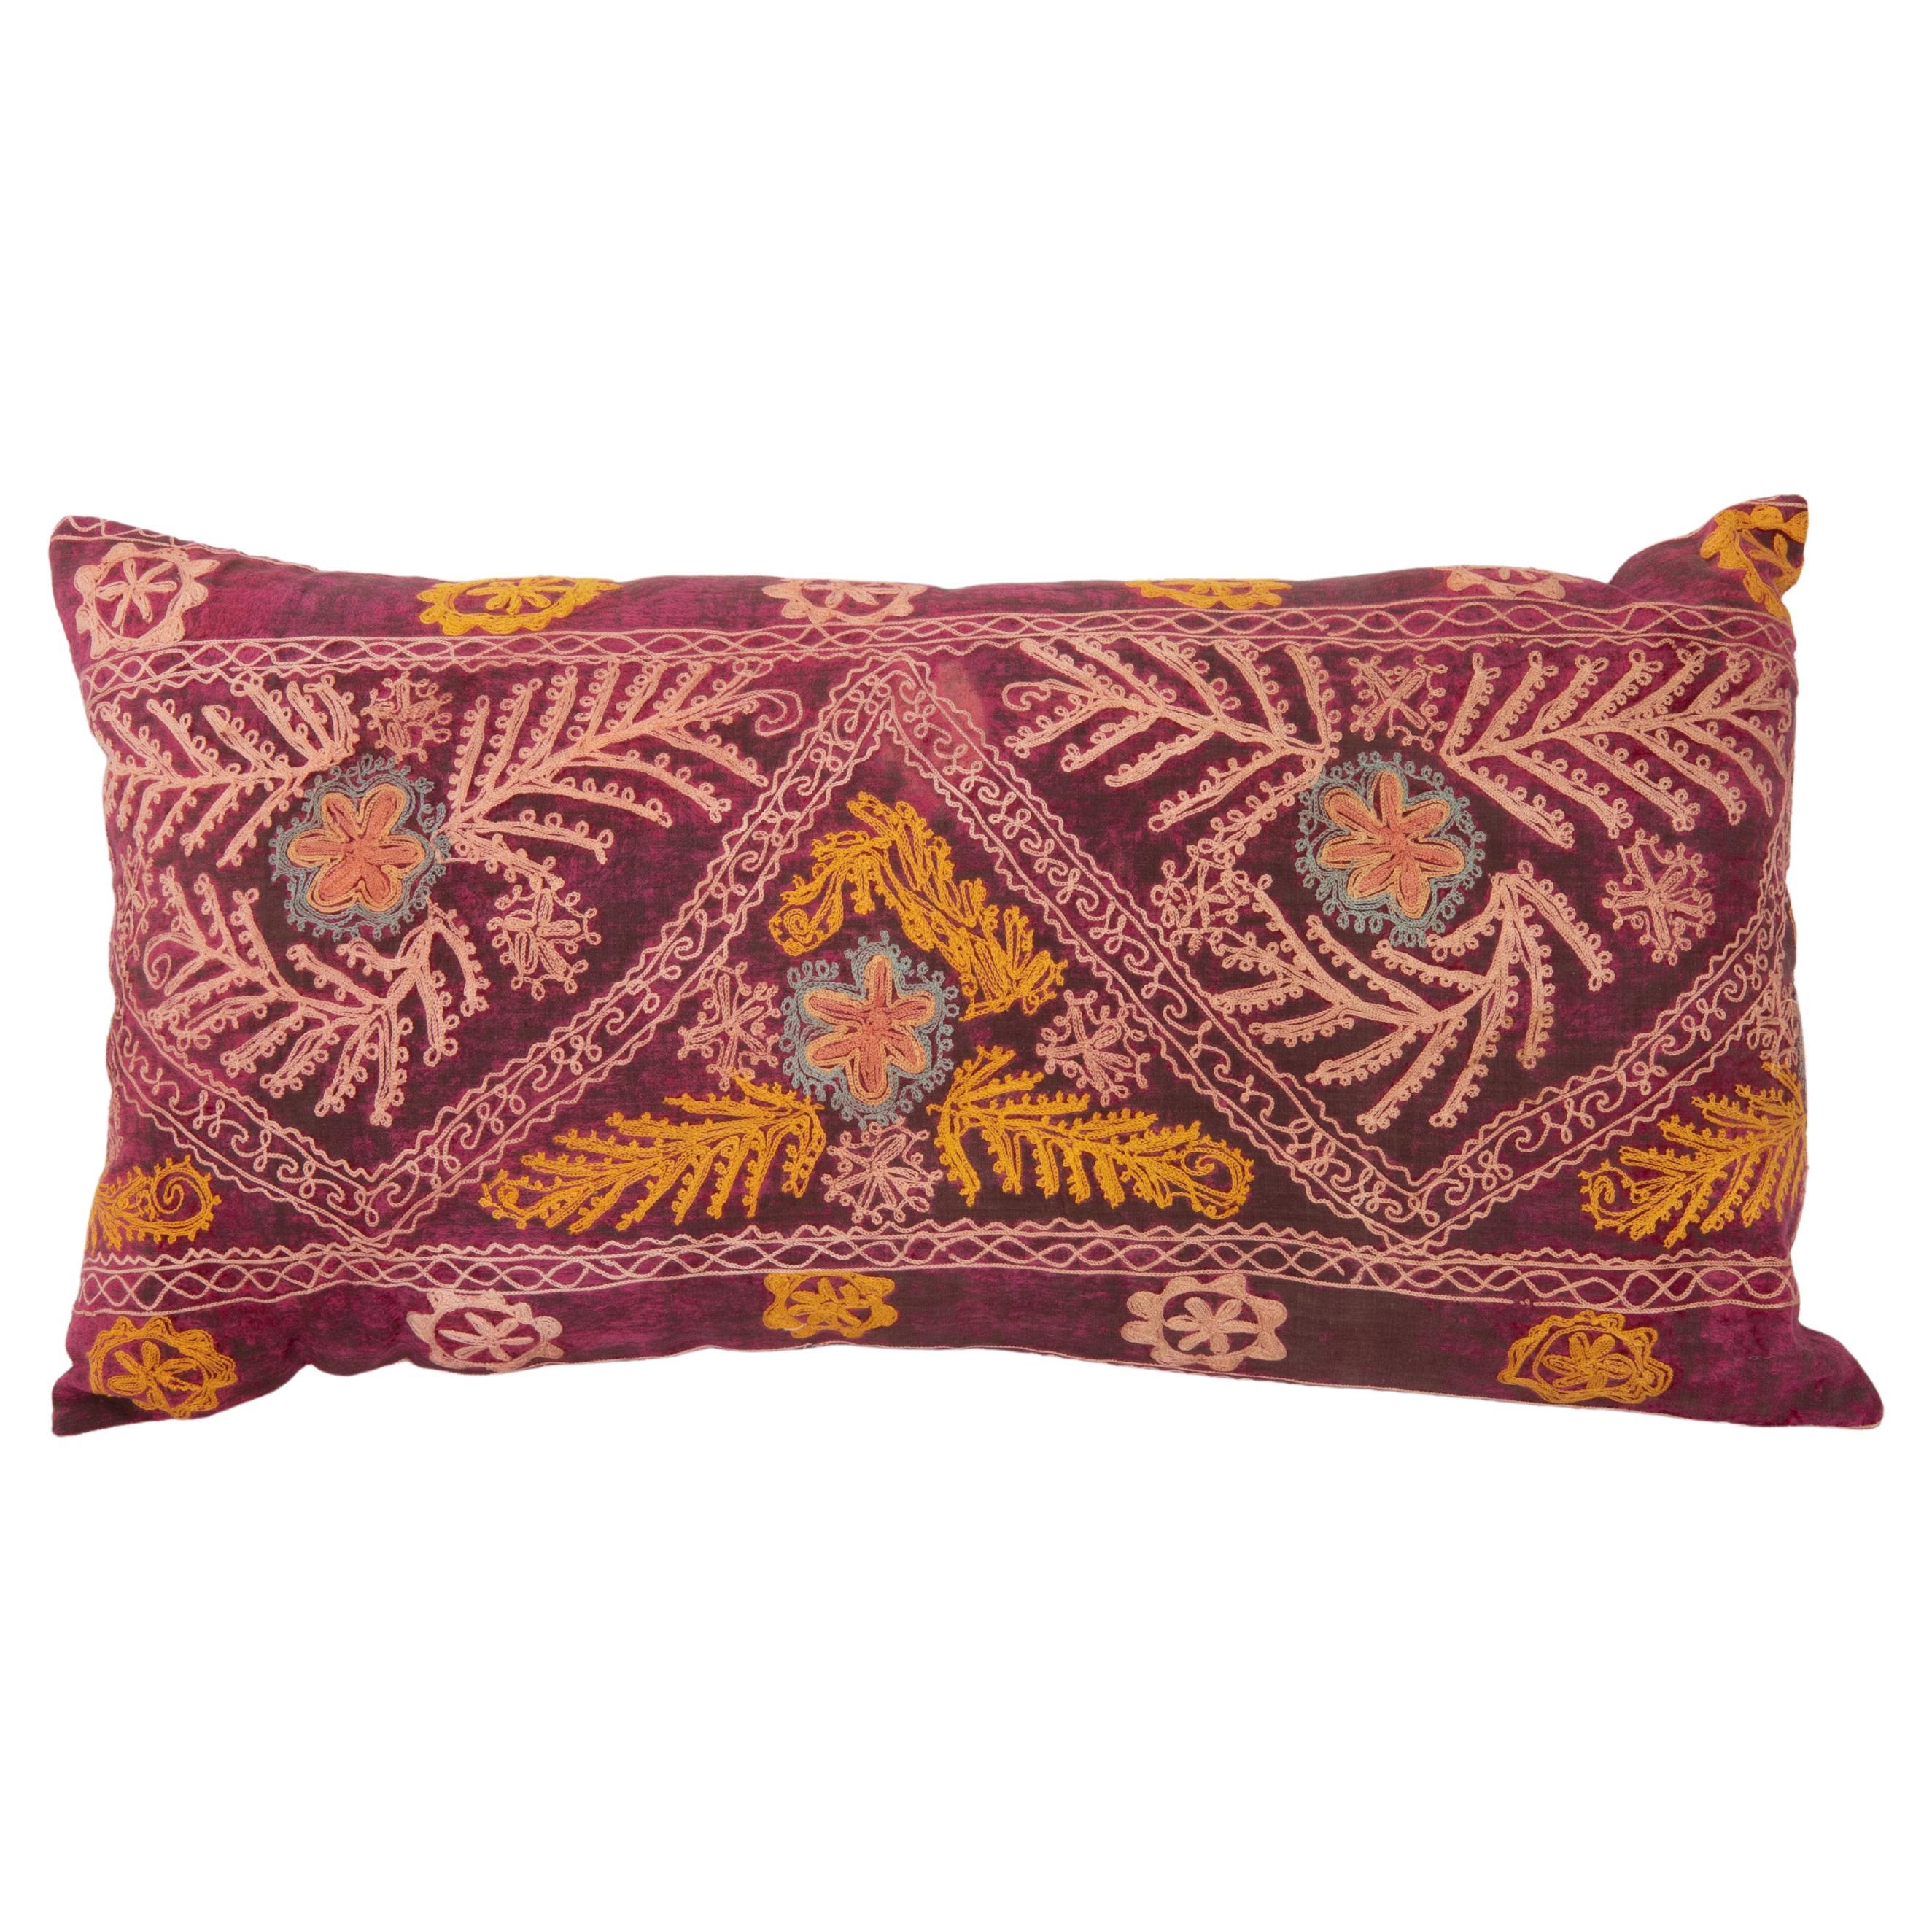 Suzani Pillow Case Made from a Vintage Velvet Ground Suzani, Mid-20th C For Sale